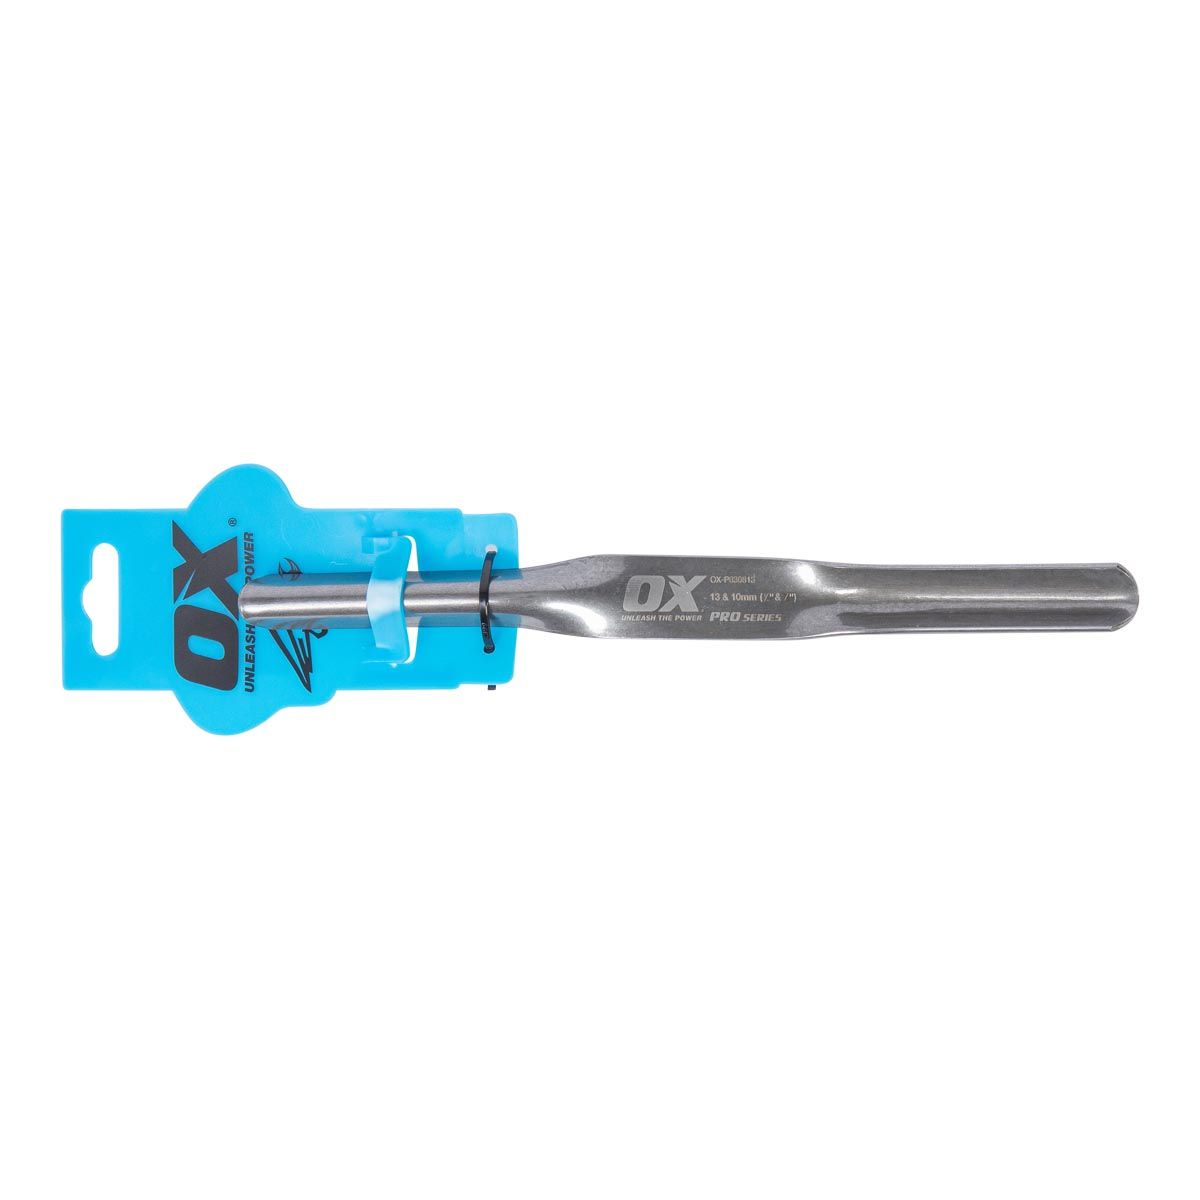 10 & 13mm (3/8 & 1/2") Spoon Jointer OX-P030813 by Ox